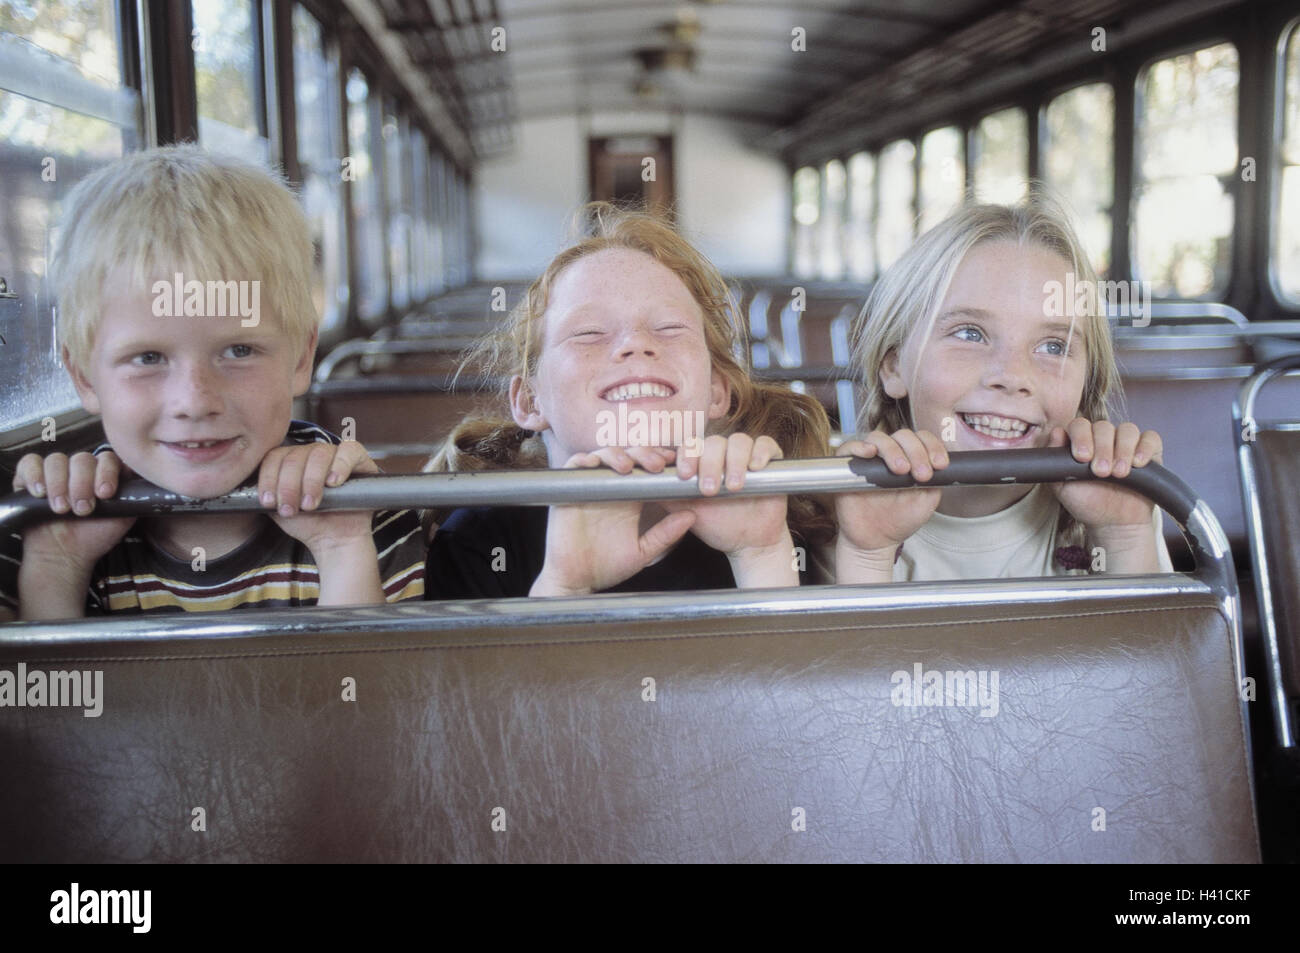 Train compartment, girl, boy, happy, sit, fun, summer, vacation, holidays, leisure time, childhood, children, 7-9 years, friends, Geschwiste, excursion, travel, train travel, train journey, trajectory, railway car, carriage, old, laugh, amuse funnily, joy Stock Photo